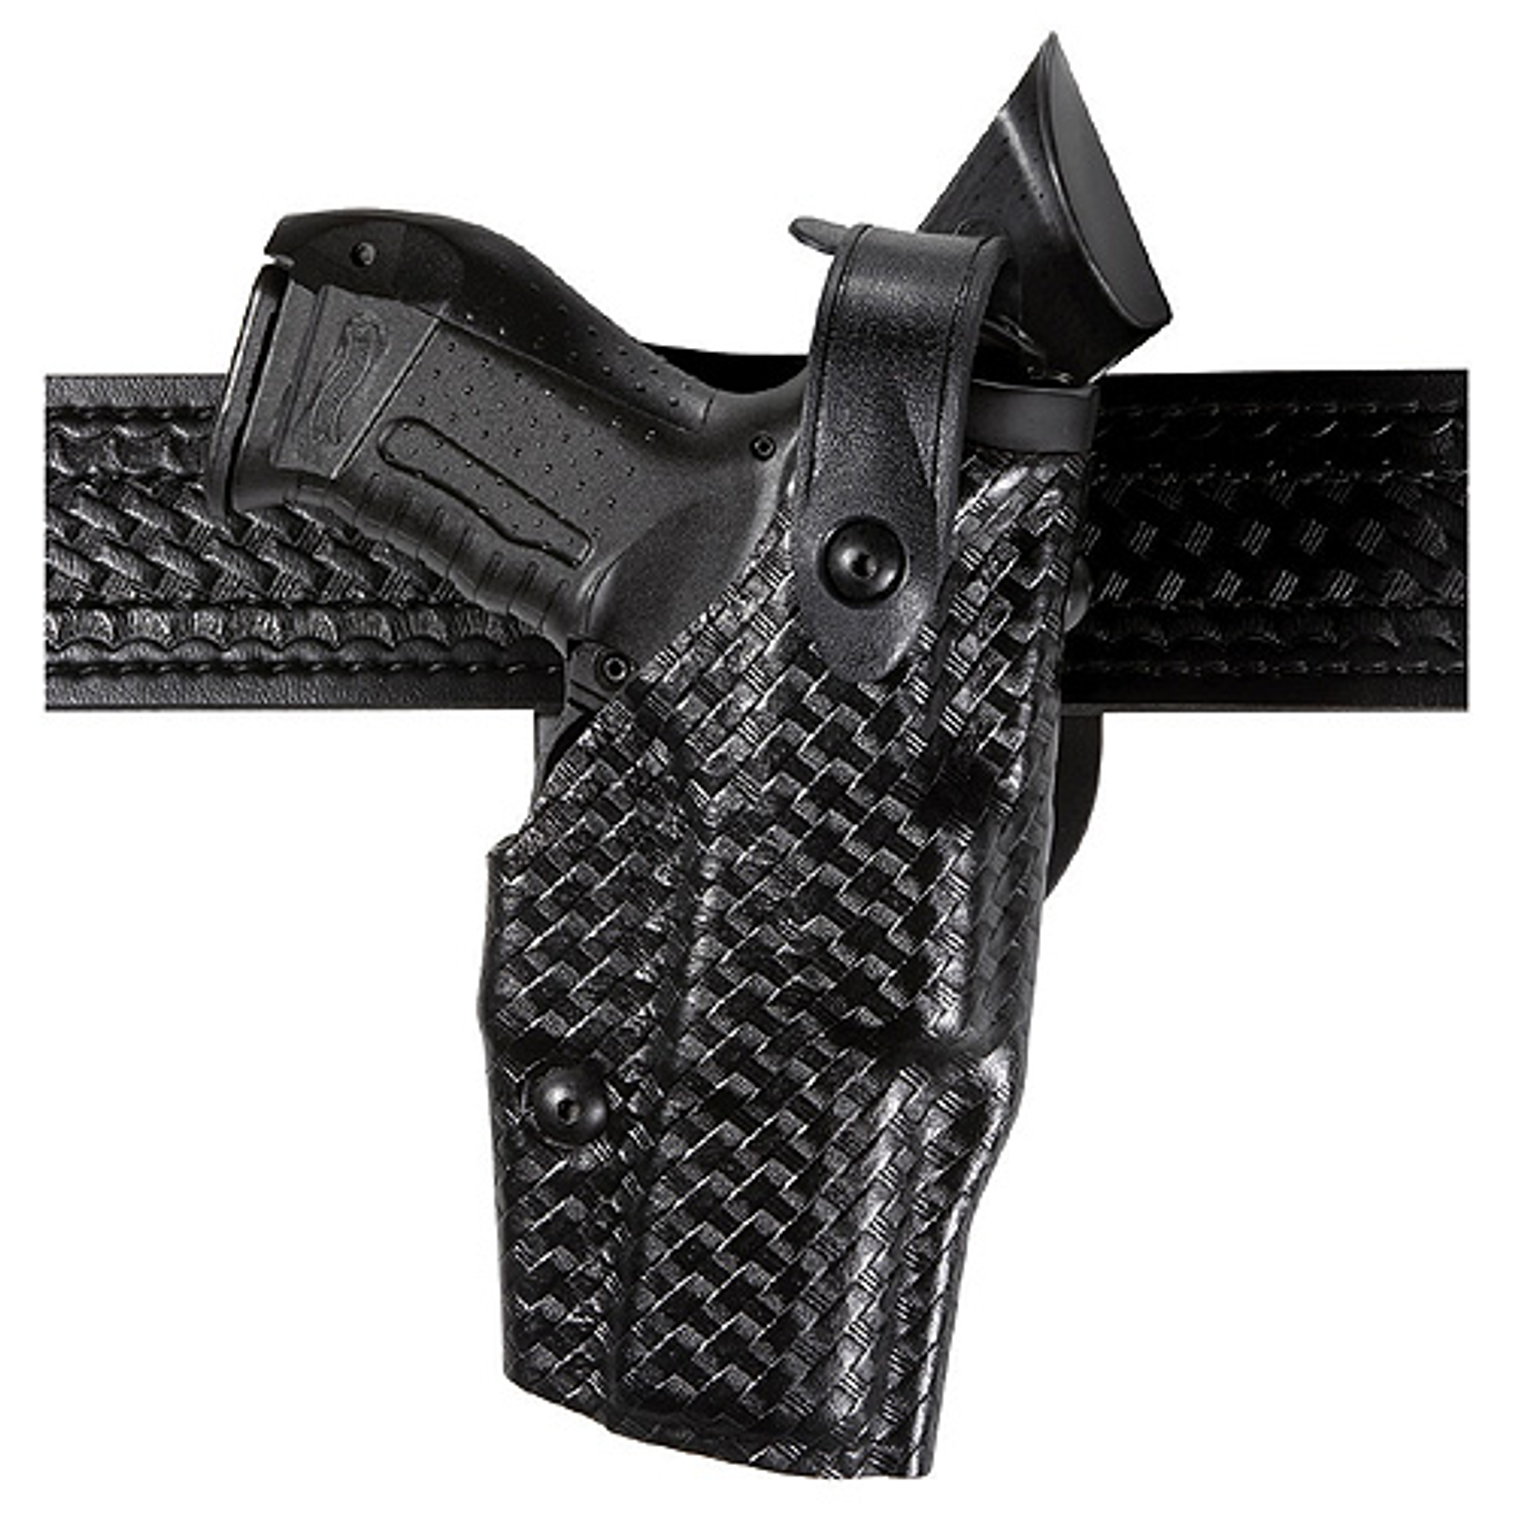 Model 6360 Als/sls Mid-ride, Level Iii Retention Duty Holster For Smith & Wesson M&p 9 - KR6360-219-481